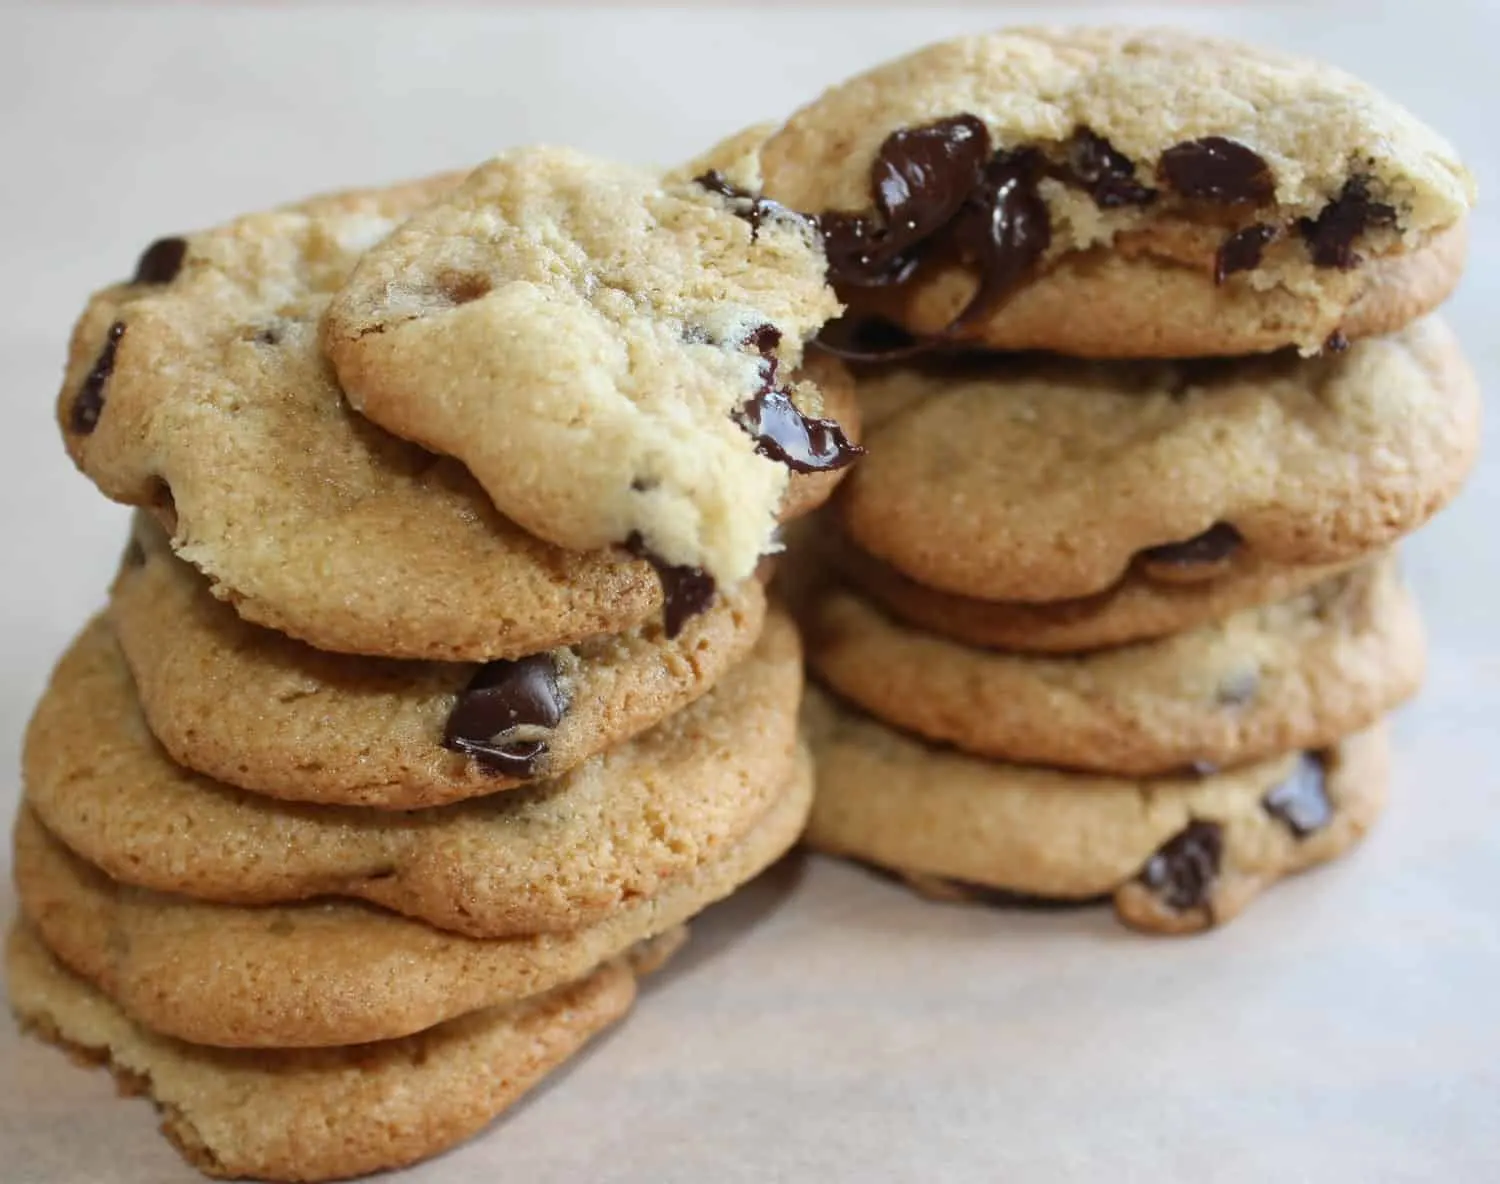 Chocolate Chip Cookies with Almond Flour is an easy cookie recipe for those trying to avoid using gluten containing flour.These chewy chocolate chip cookies are loaded with chocolate chips of your choosing.